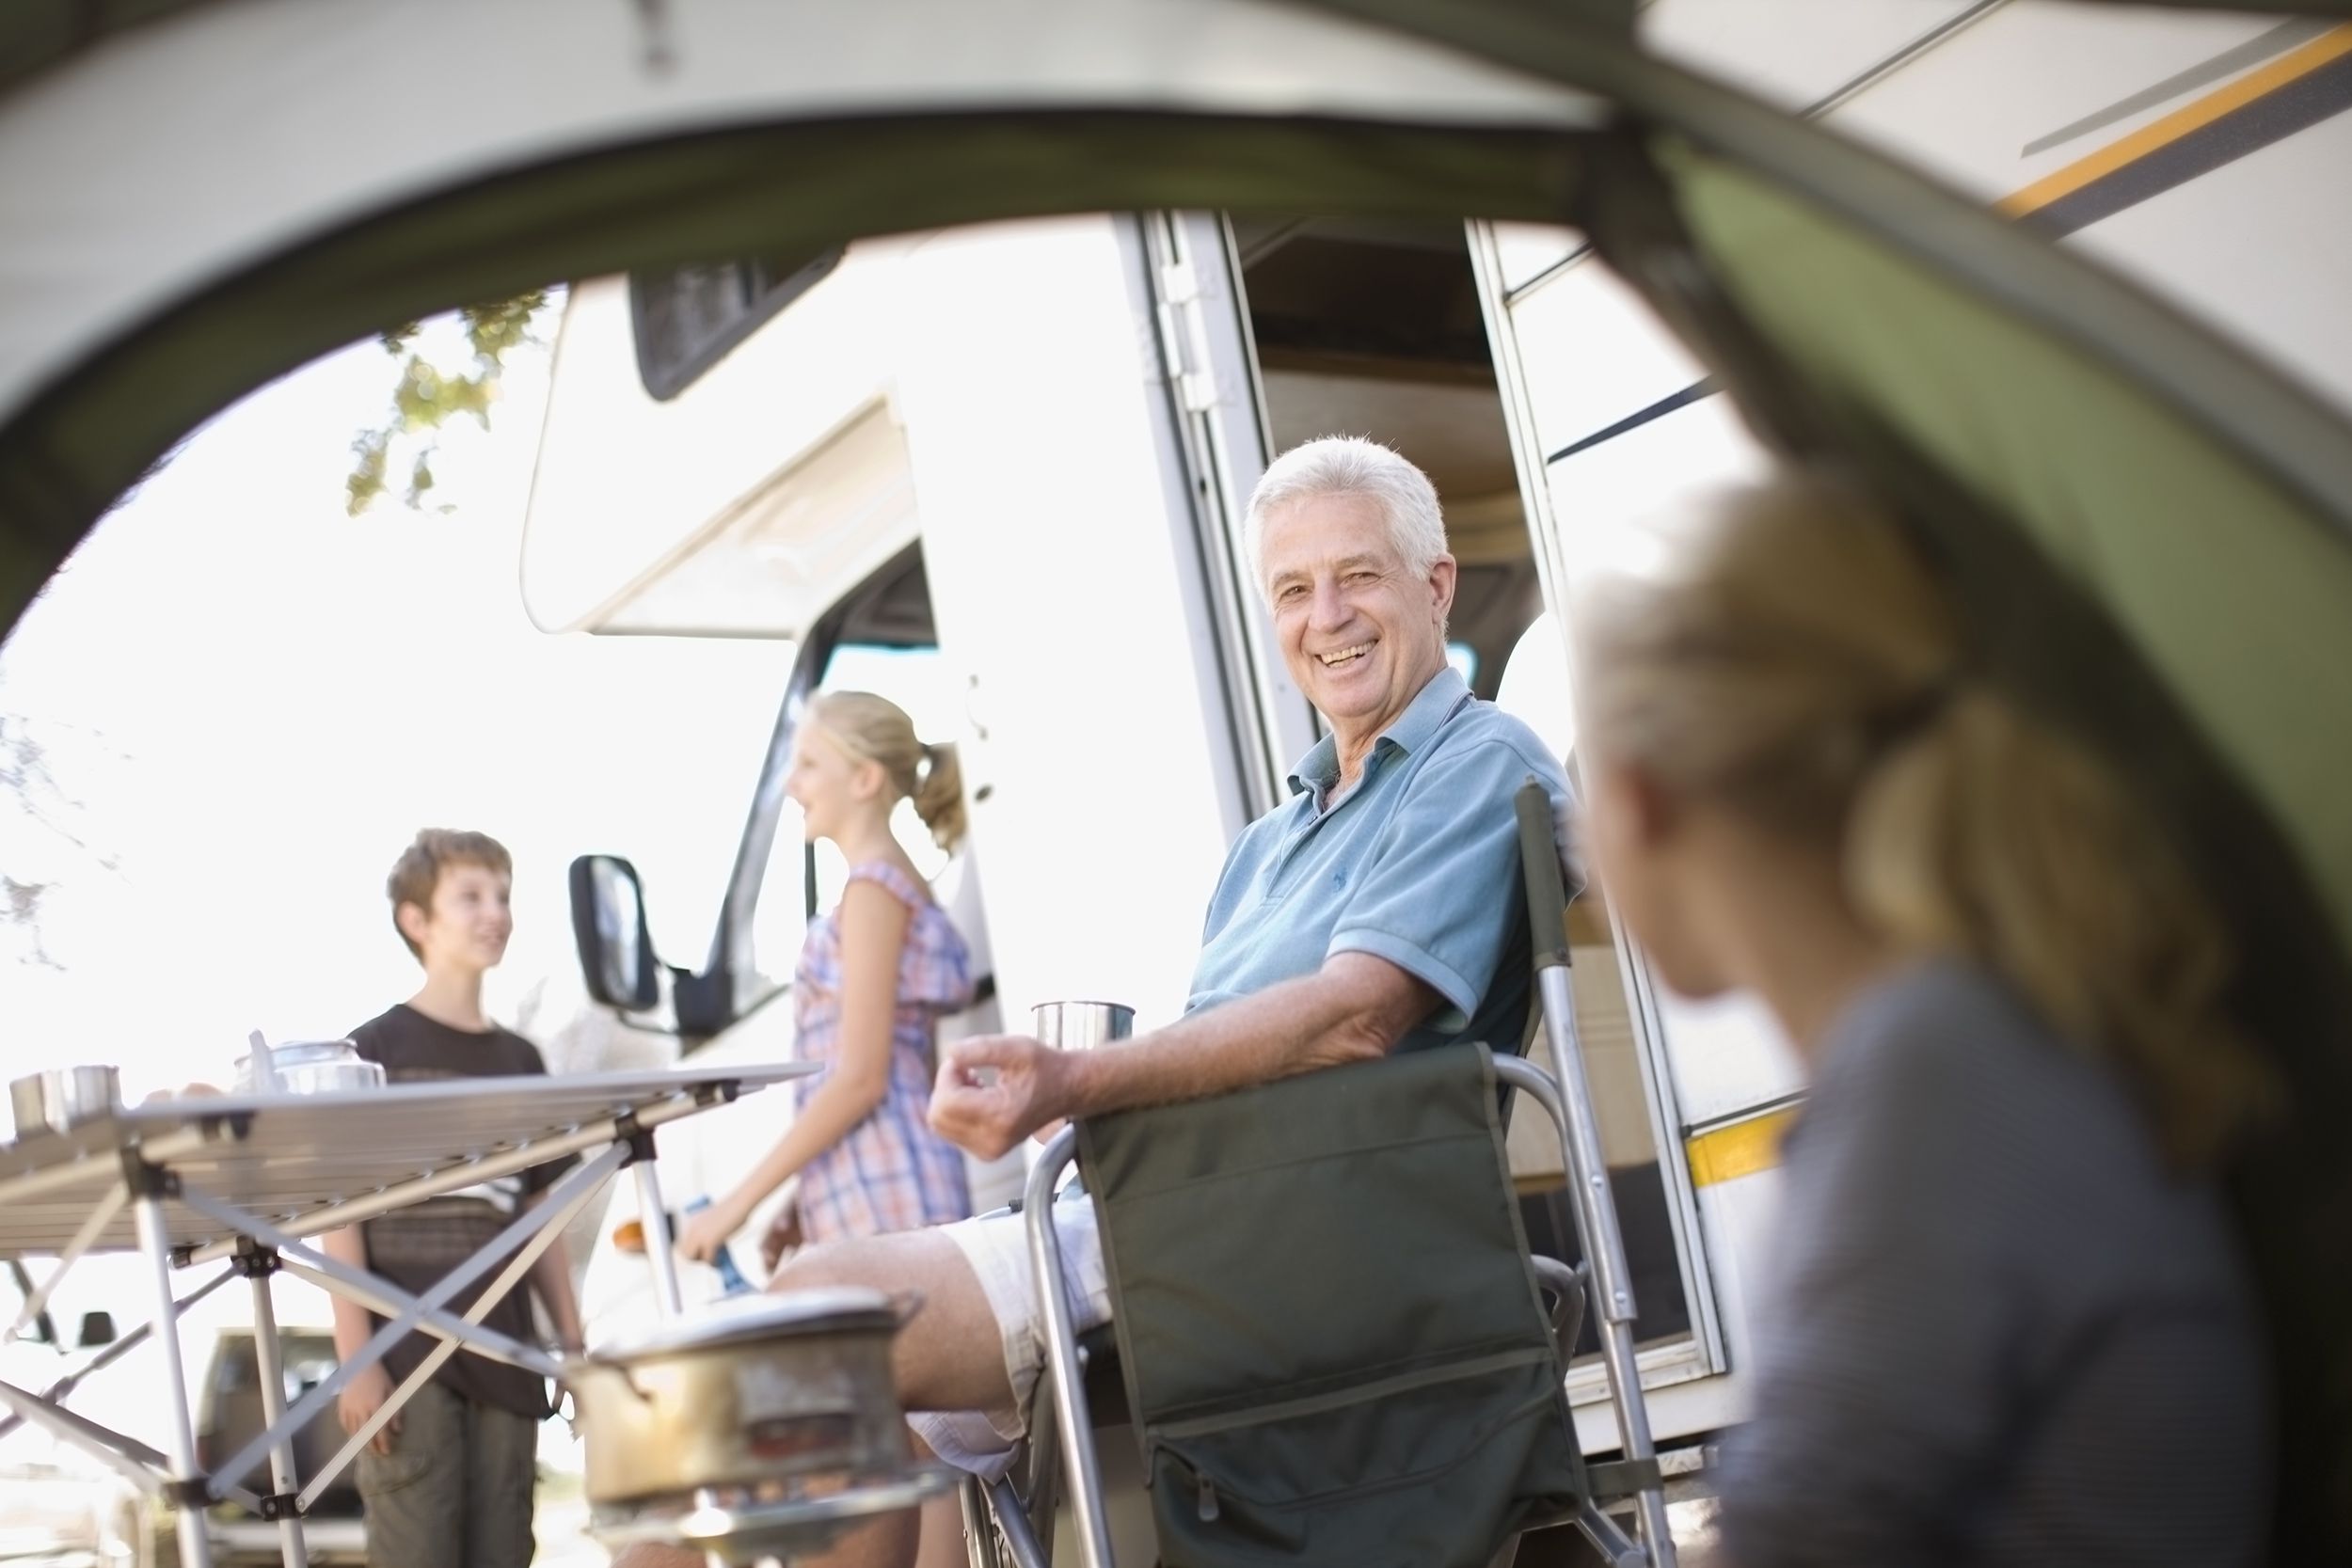 <p>If you are buying from a private seller, chances are you won't be your RVs first owner. That can actually be a good thing, according to Kelly Beasley, co-founder of RV education and product review site <a href="https://campaddict.com/">Camp Addict</a>. "It's quite common to hear stories from people buying new, and the RV has issue after issue and stays in the shop for months," she says. In cases like these, owners have often already worked out any kinks from the factory. Furthermore, owners have sometimes already paid for upgrades to their RVs after buying new, which also means used models are often better-equipped than new ones.</p><p><b>Related:</b> <a href="https://blog.cheapism.com/costco-rv-buying-program/">Is Buying an RV Through Costco Worth It?</a></p>